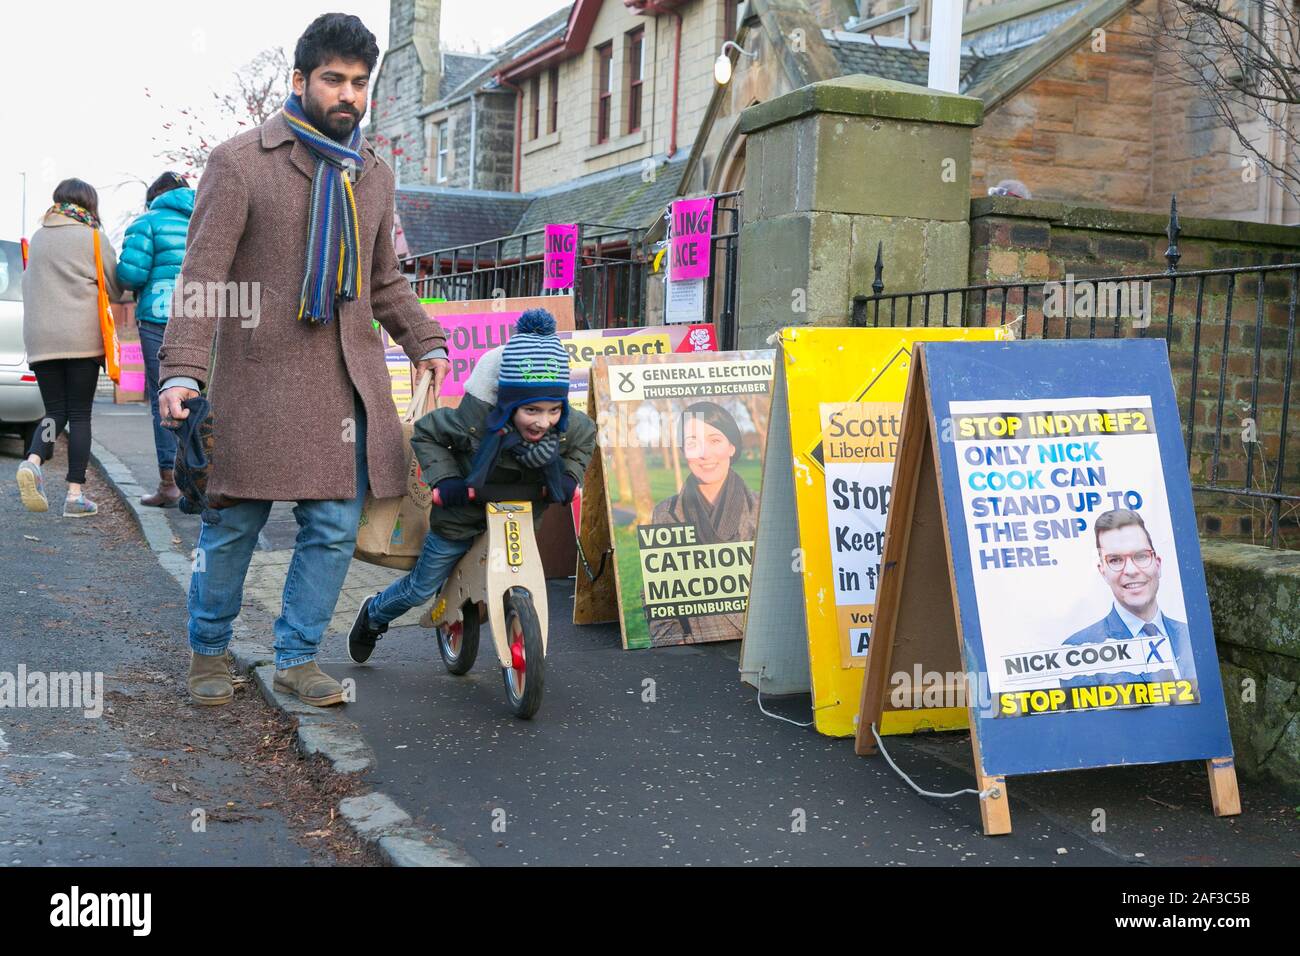 Edinburgh, Scotland, 12th December 2019. A father has cast his vote for a candidate at the UK's winter General Election. His young son isn't interested. Credit: Brian Wilson/Alamy Live News. Stock Photo